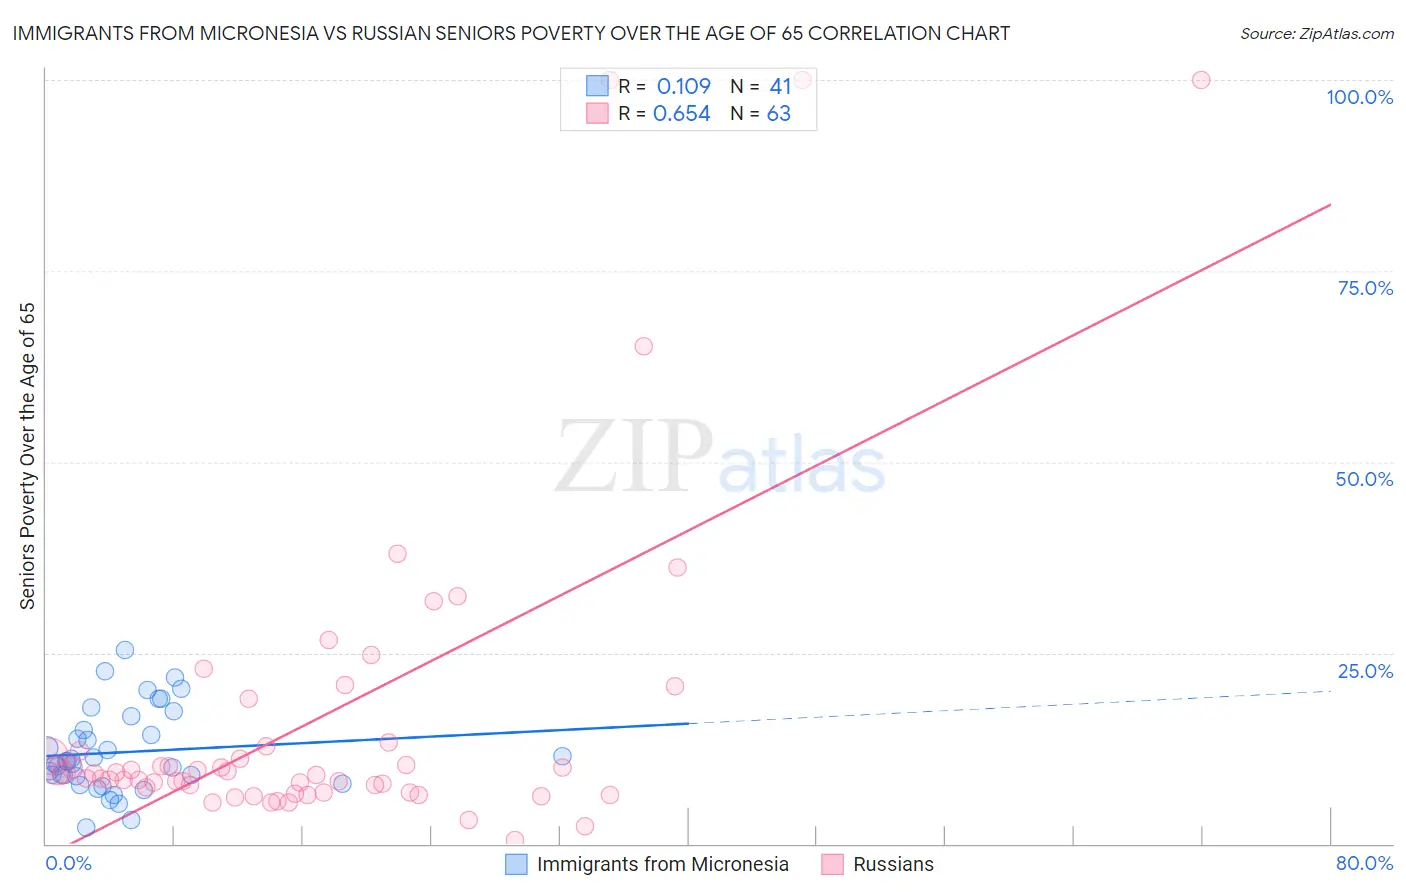 Immigrants from Micronesia vs Russian Seniors Poverty Over the Age of 65